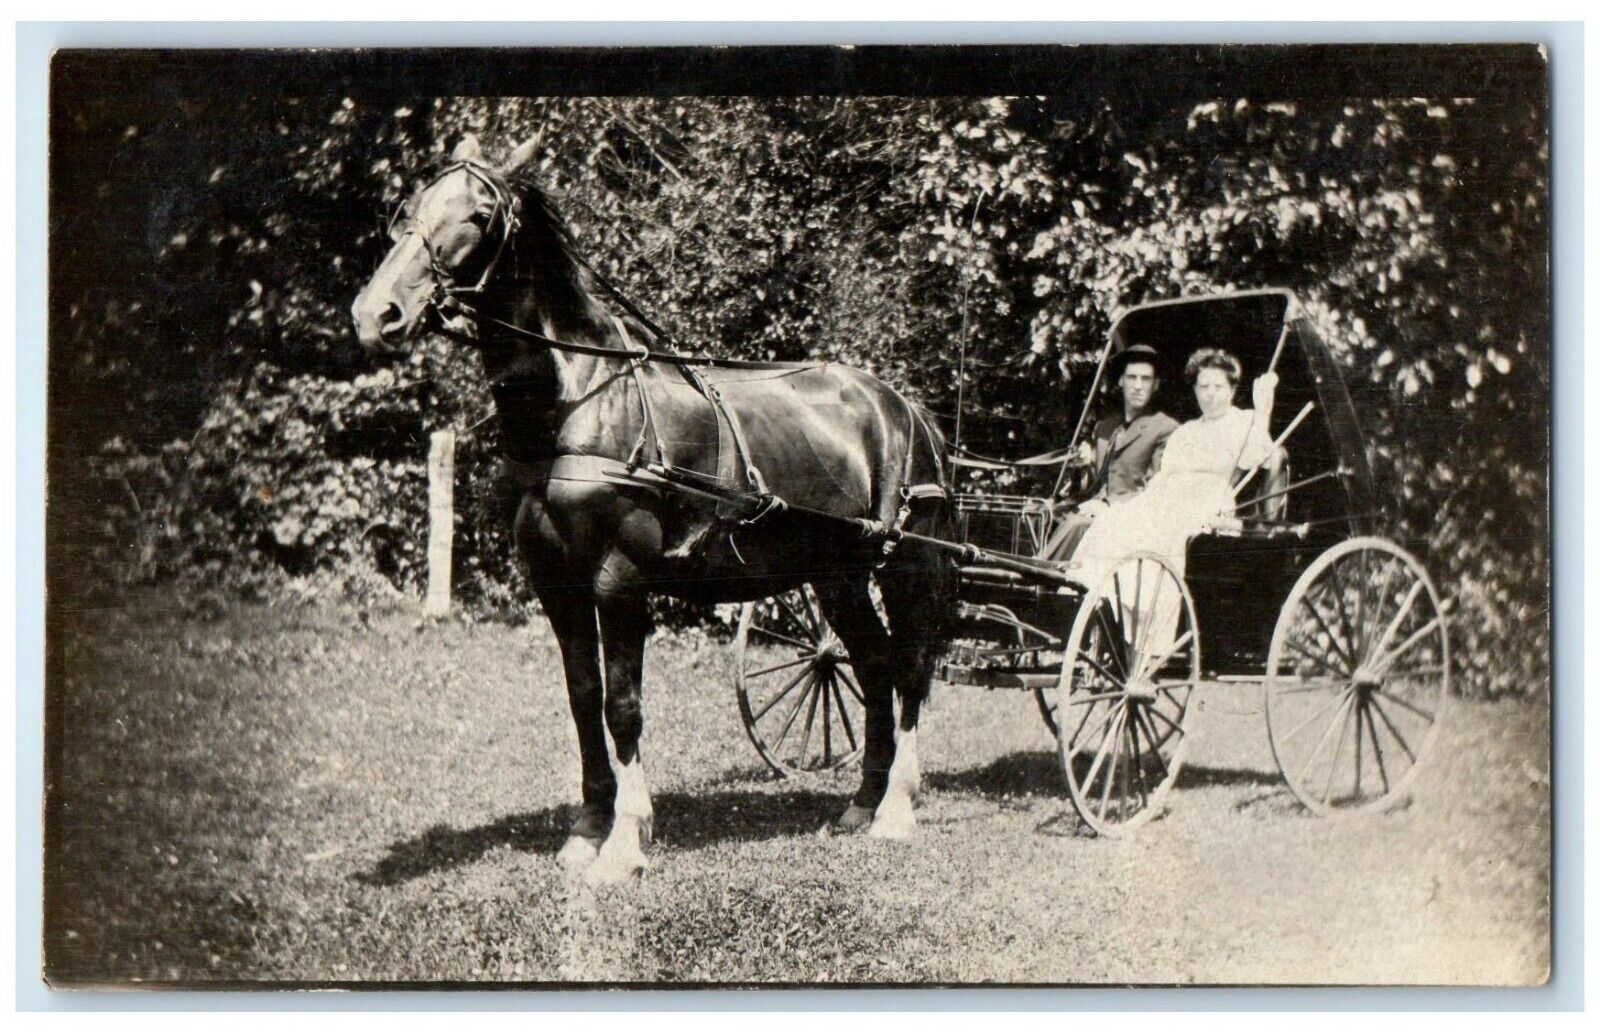 1908 Horse Carriage Morrisville Wisconsin WI RPPC Photo Posted Antique Postcard